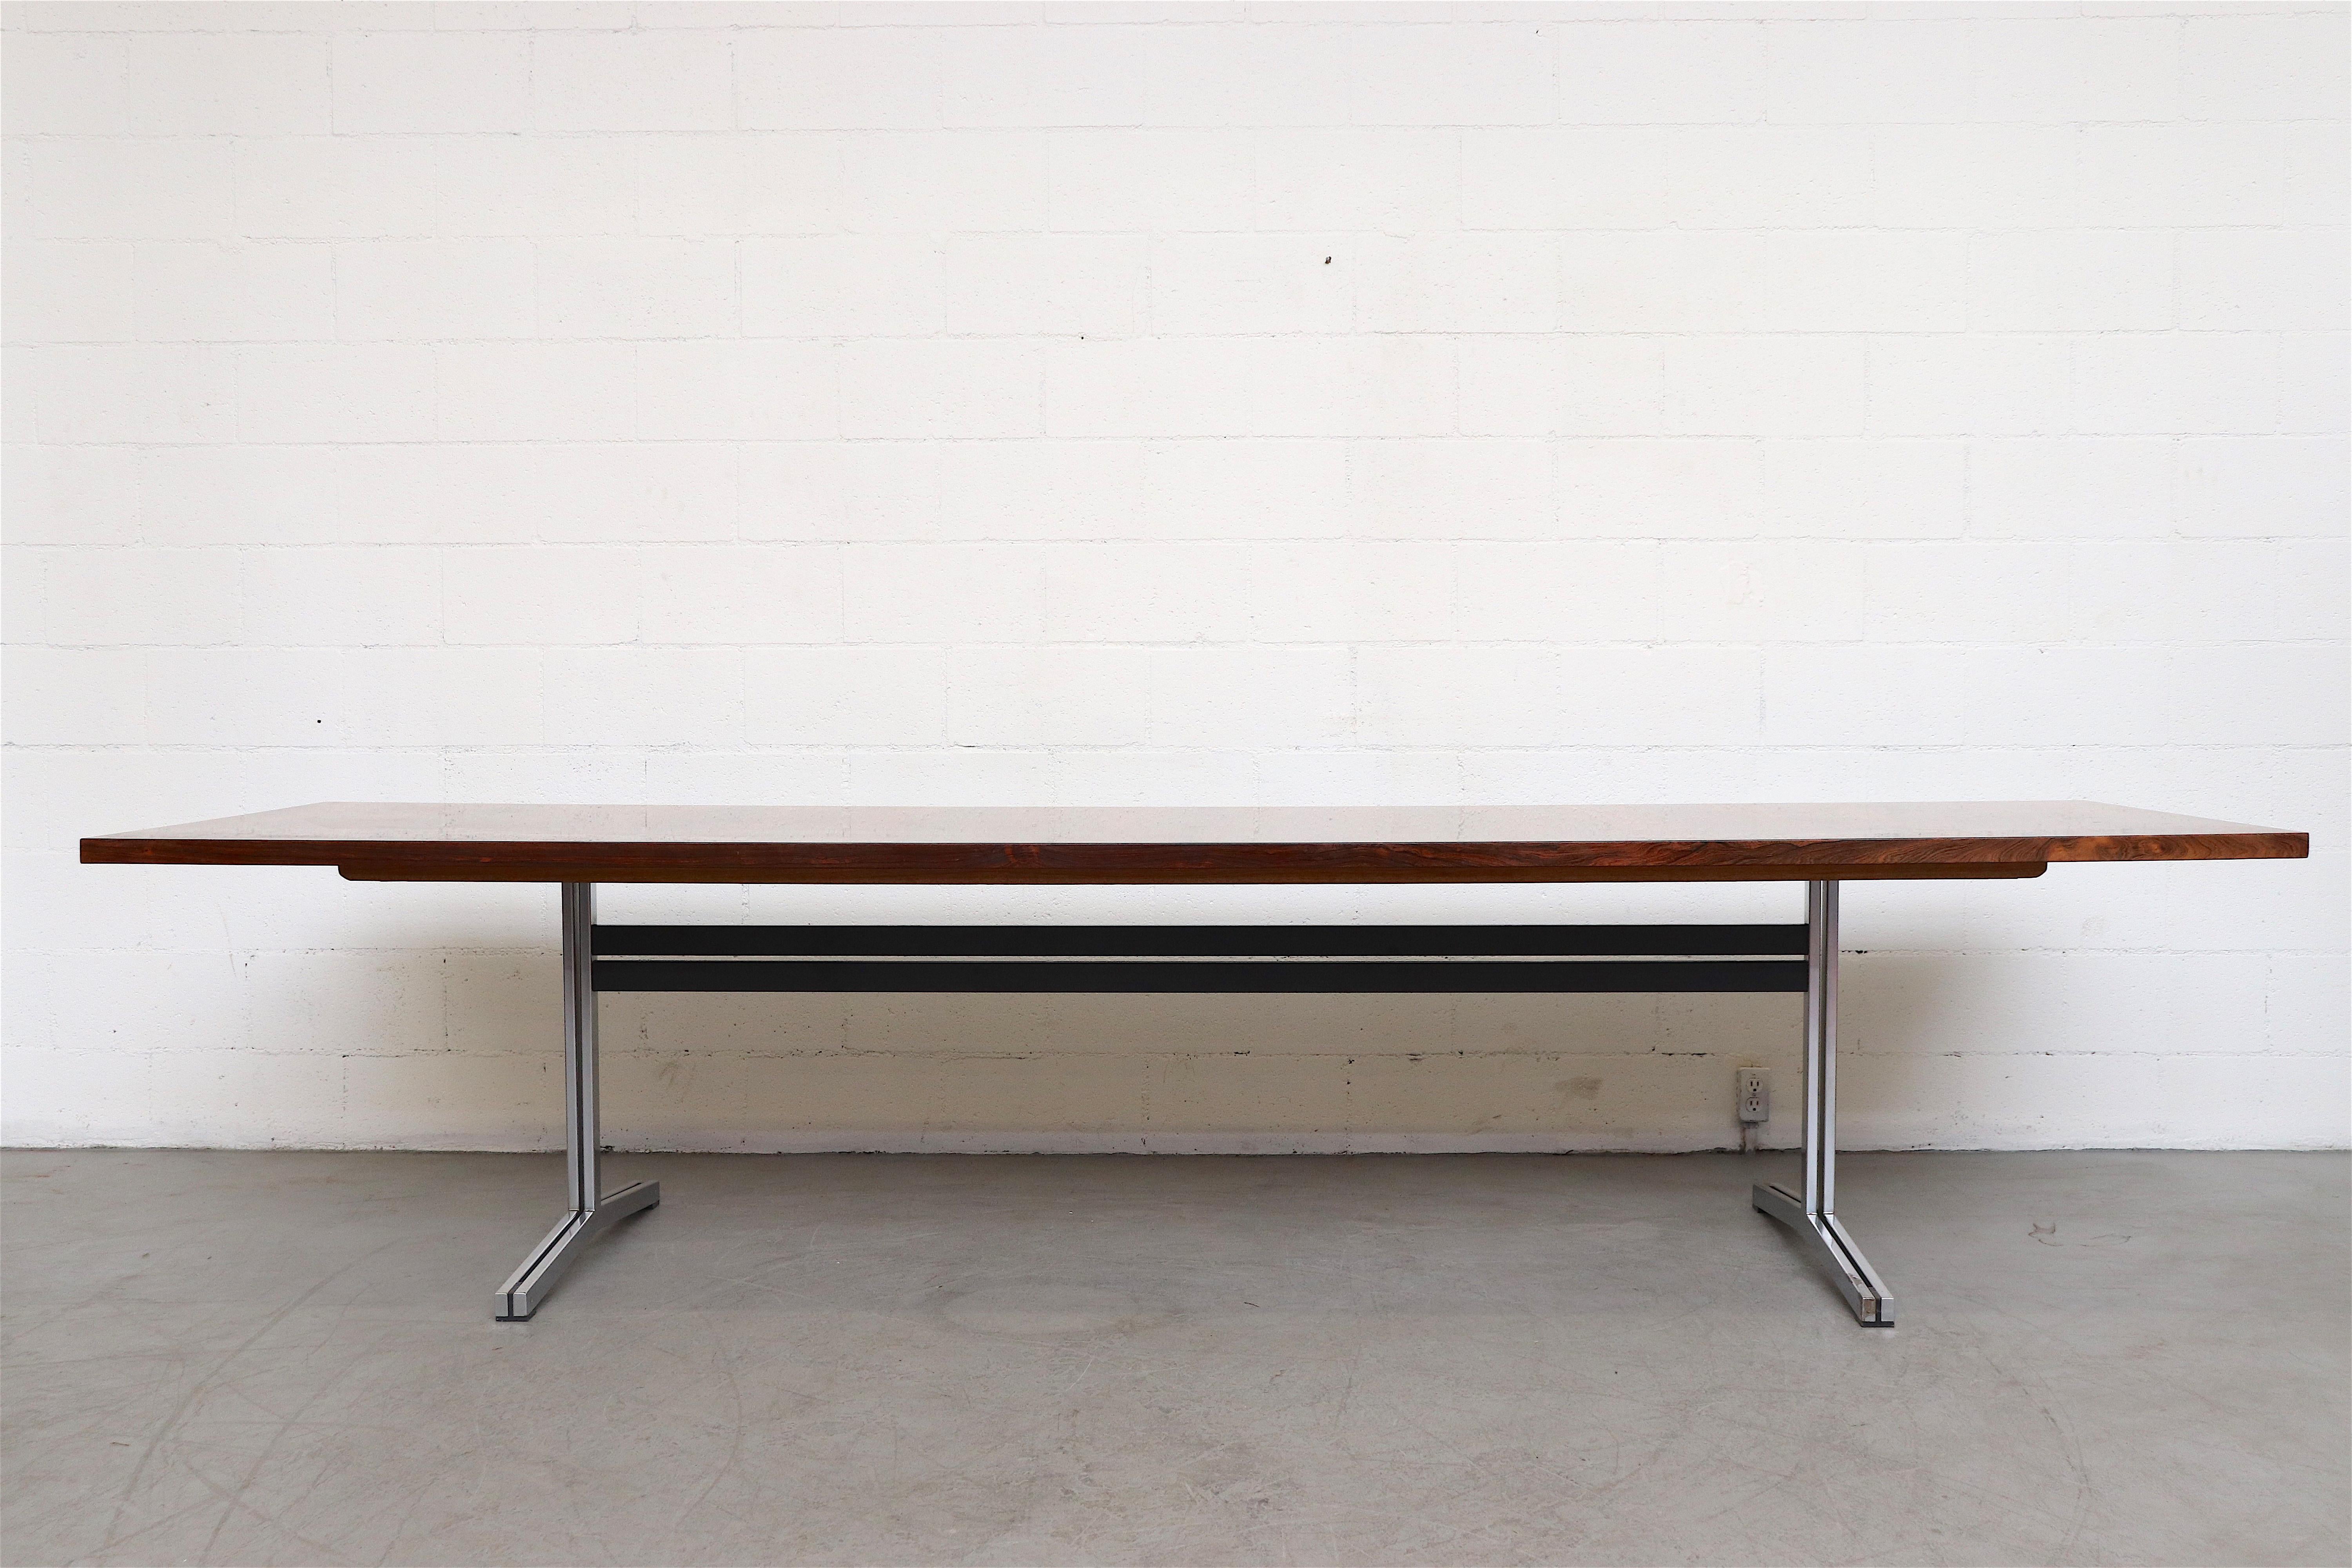 Gorgeous exceptionally long A.P. Originals rosewood dining or conference table with chrome and steel frame. Both top and frame are in very original condition. Frame shows some wear and some loss to the chrome. The top has a gloss lacquer finish with